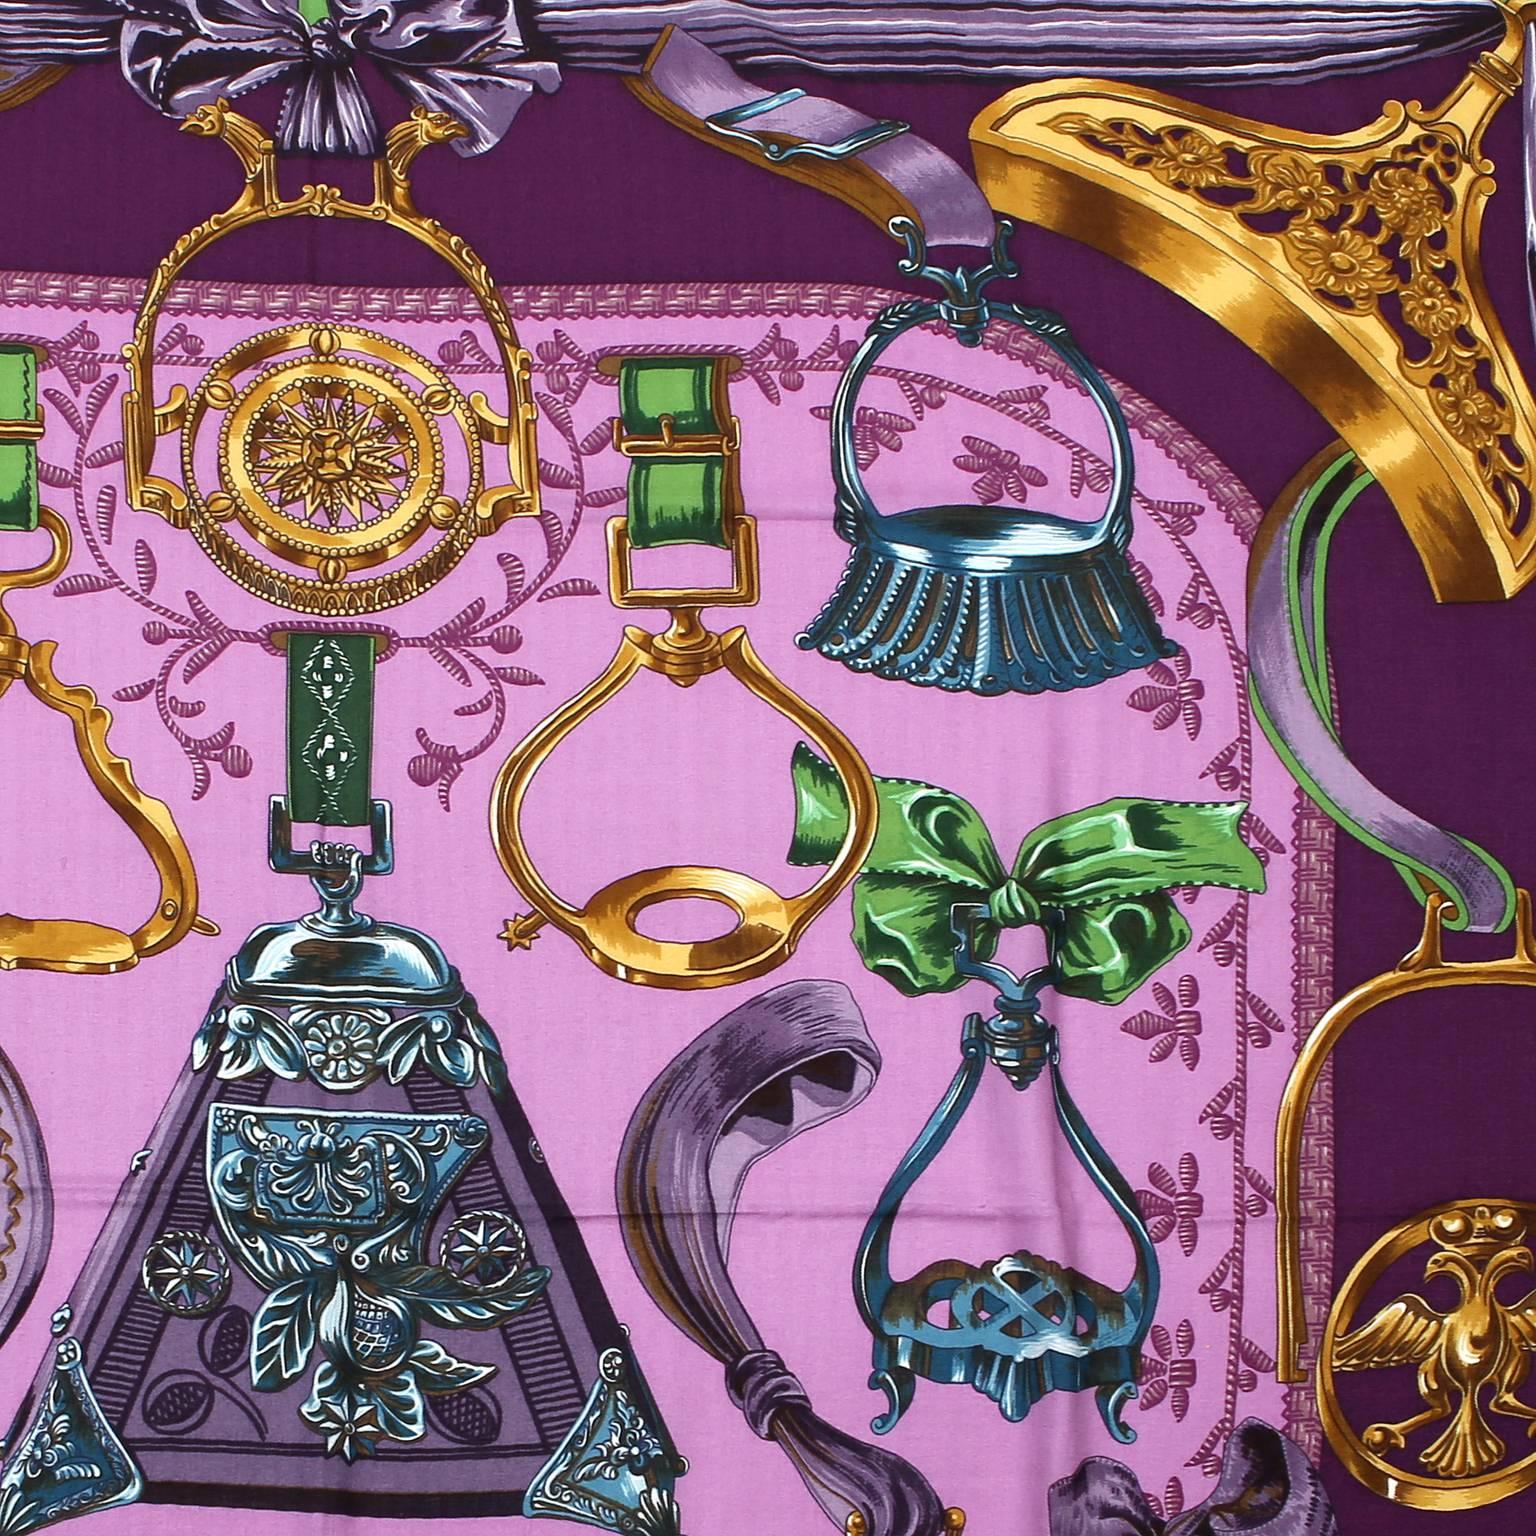 Hermès Purple Etriers Cashmere and Silk Shawl- Pristine
  The equestrian themed design features antique stirrups, highlighting the intricate metalwork and exquisite details.       Varying shades of purple and gold with a bright green border.   65%